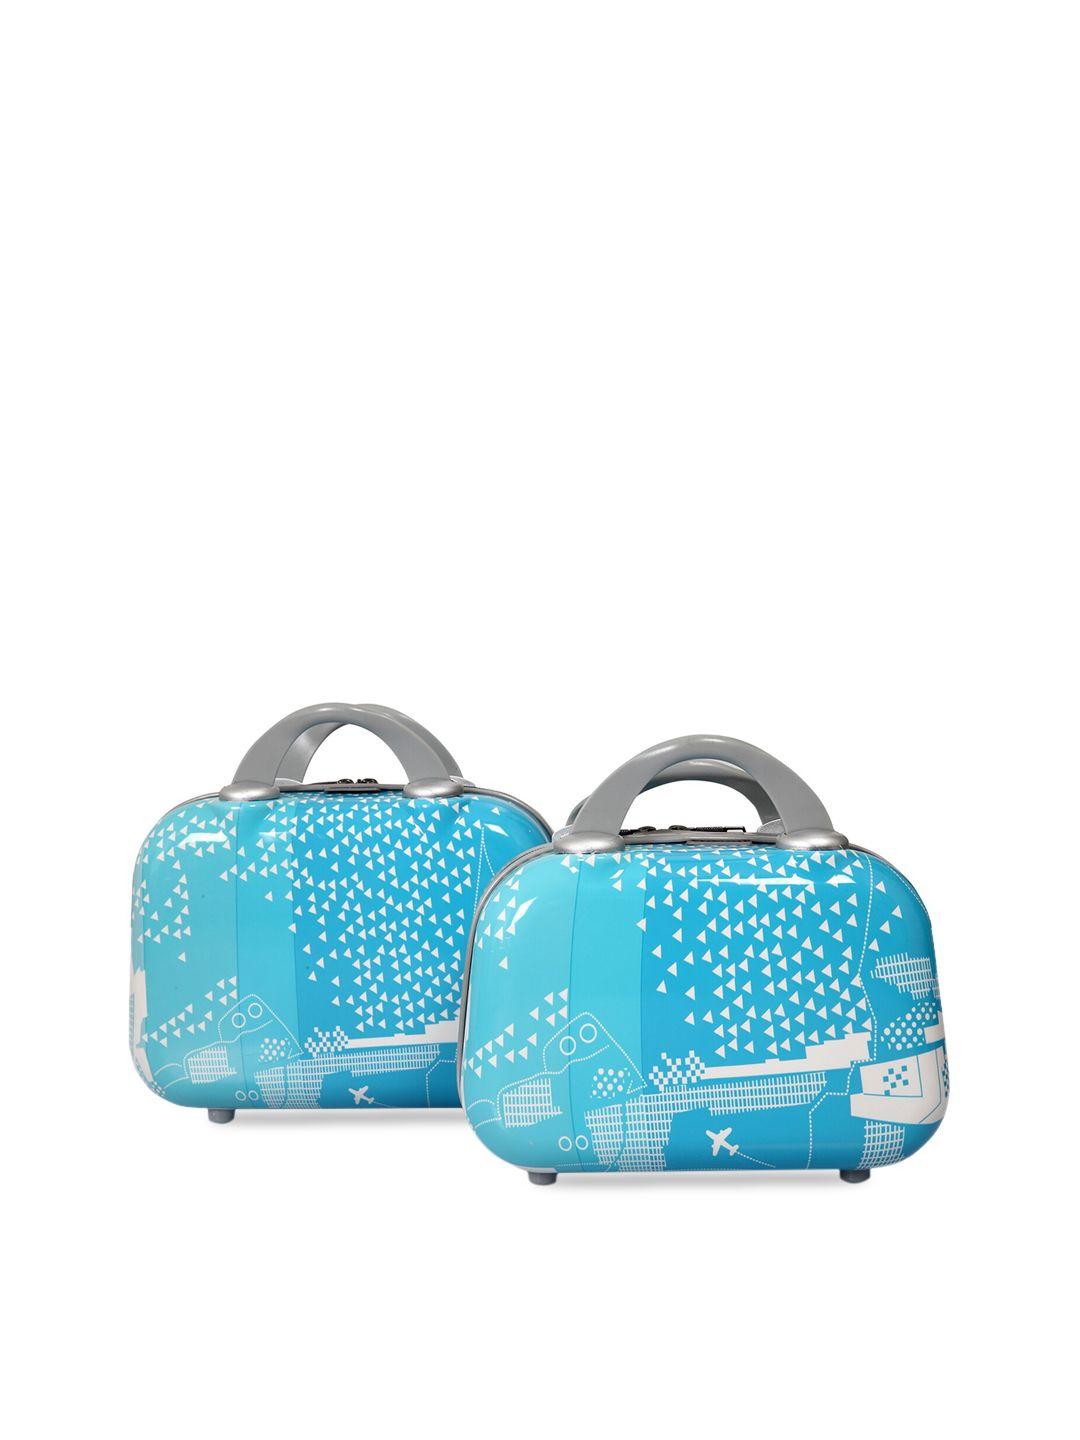 polo class blue & white abstract print 2 pc vanity bag set